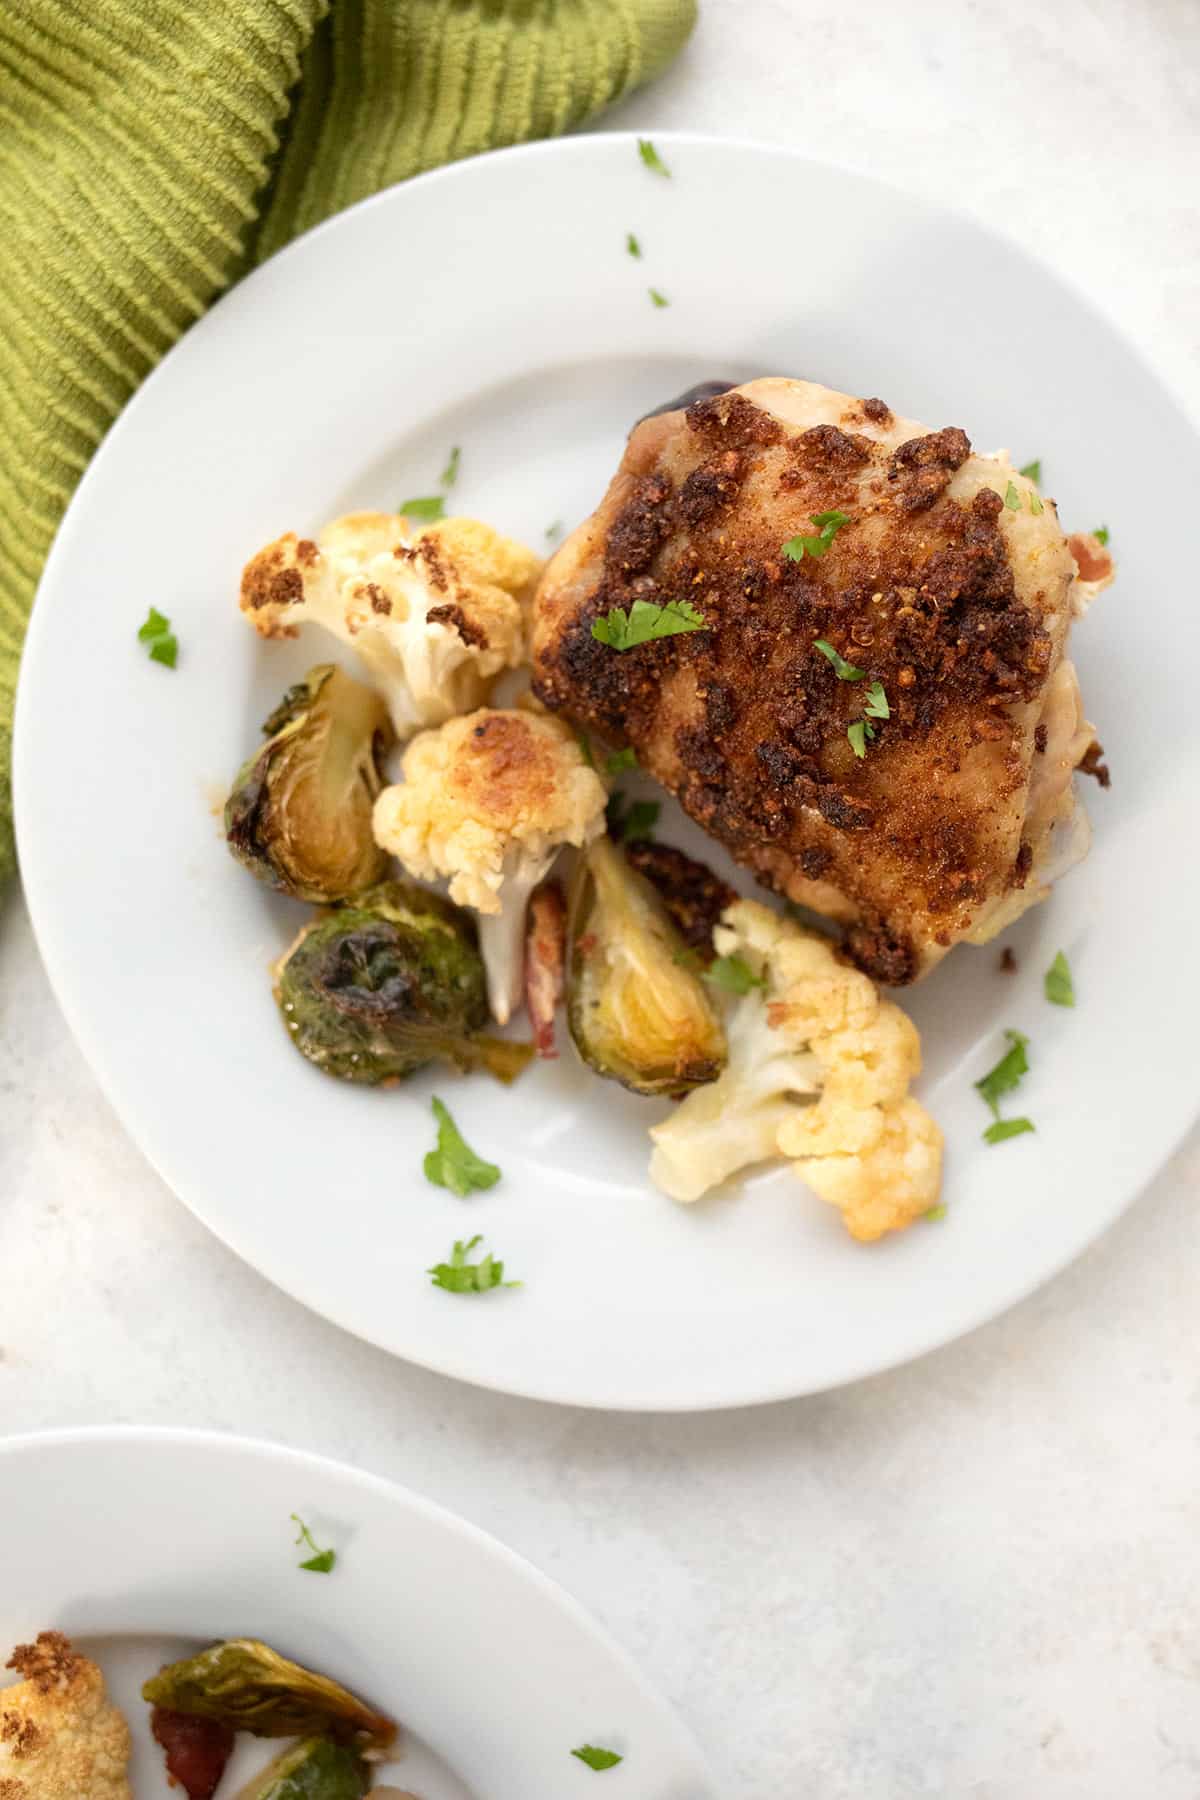 Top down image of a plate with sheet pan chicken and veggies.